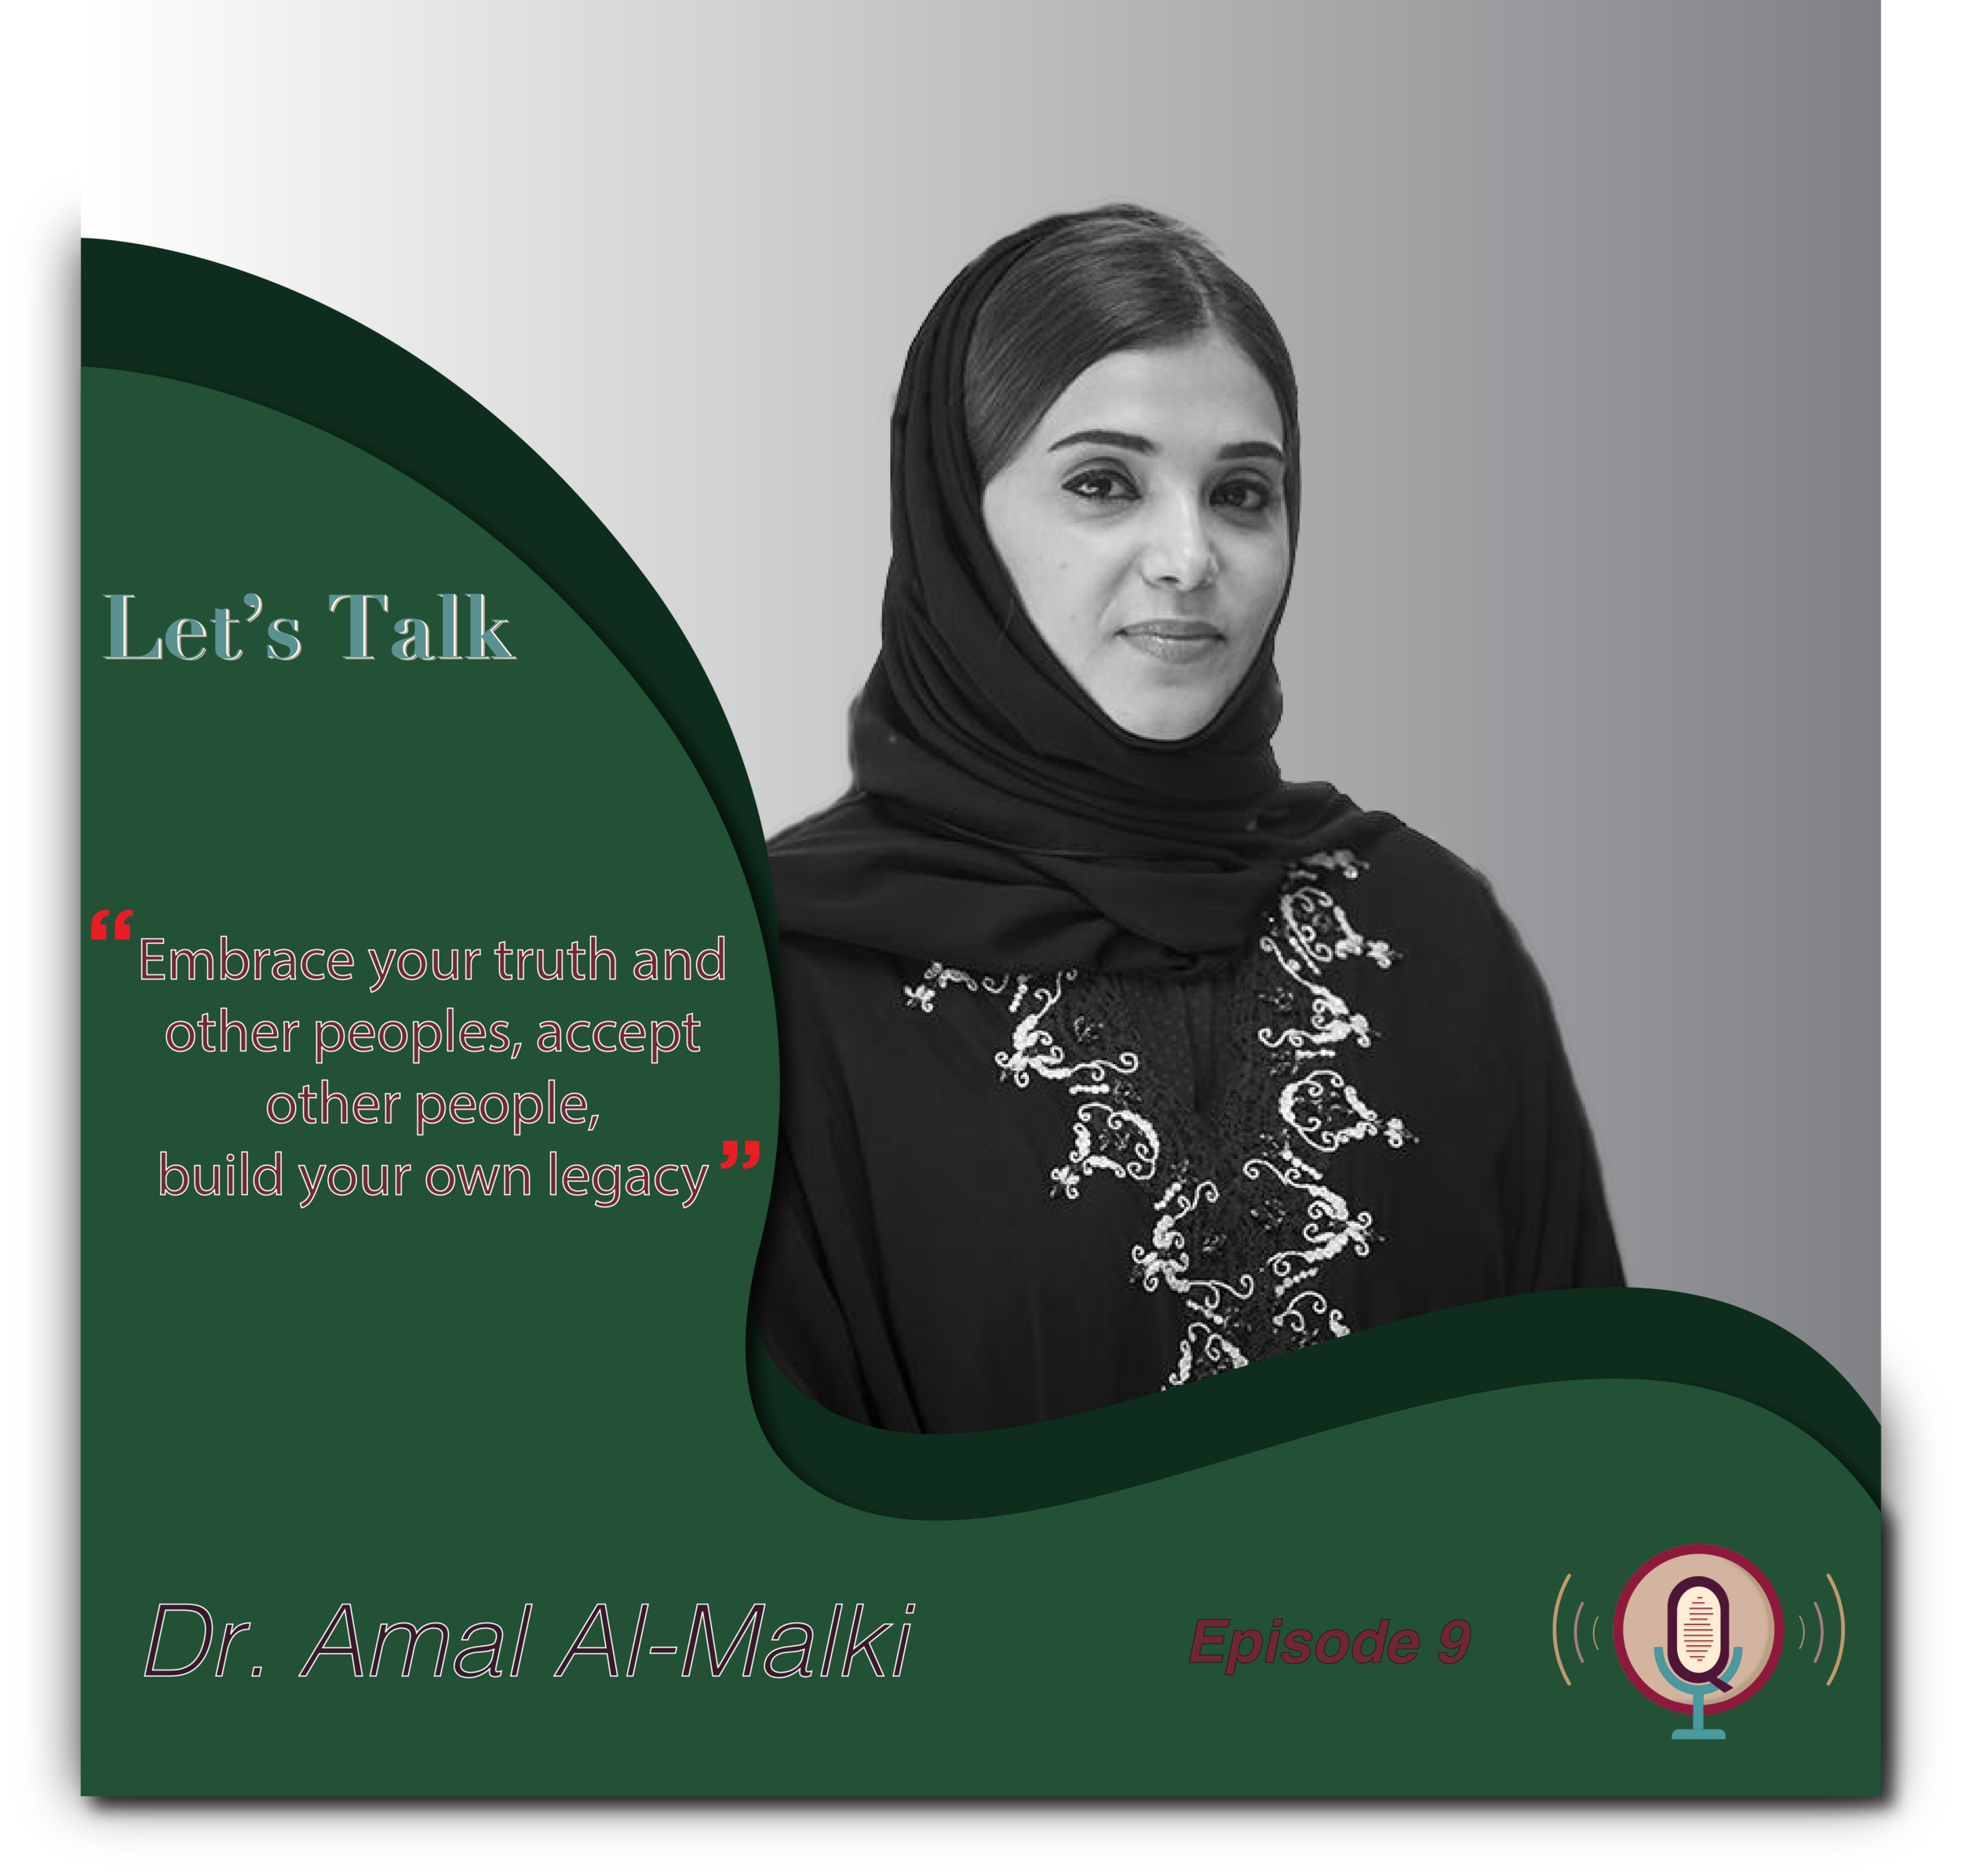 Dr. Amal AlMalki a guest in a podcast